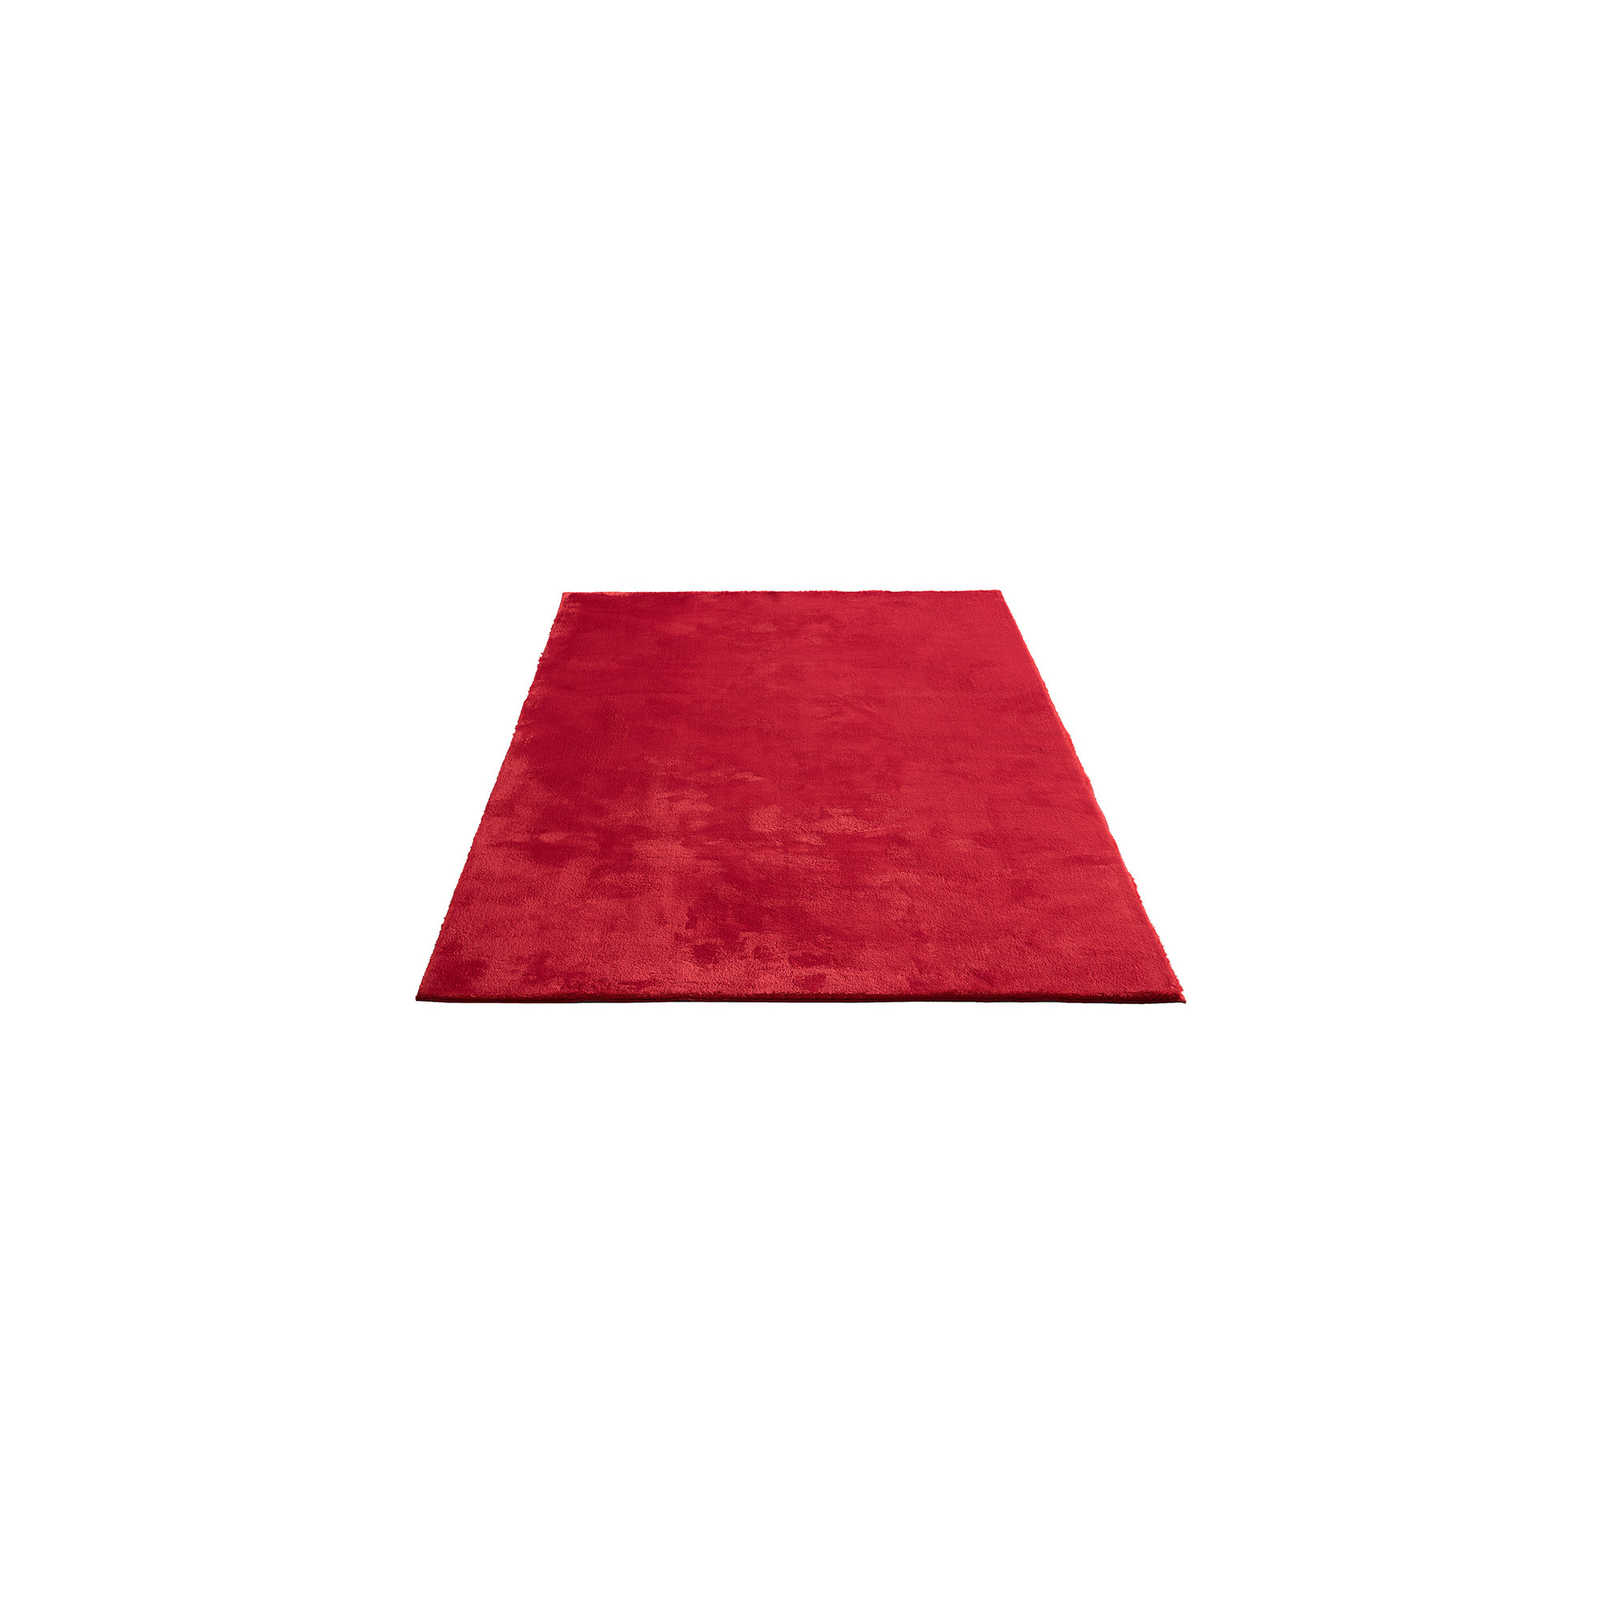 Extra soft high pile carpet in red - 150 x 80 cm
